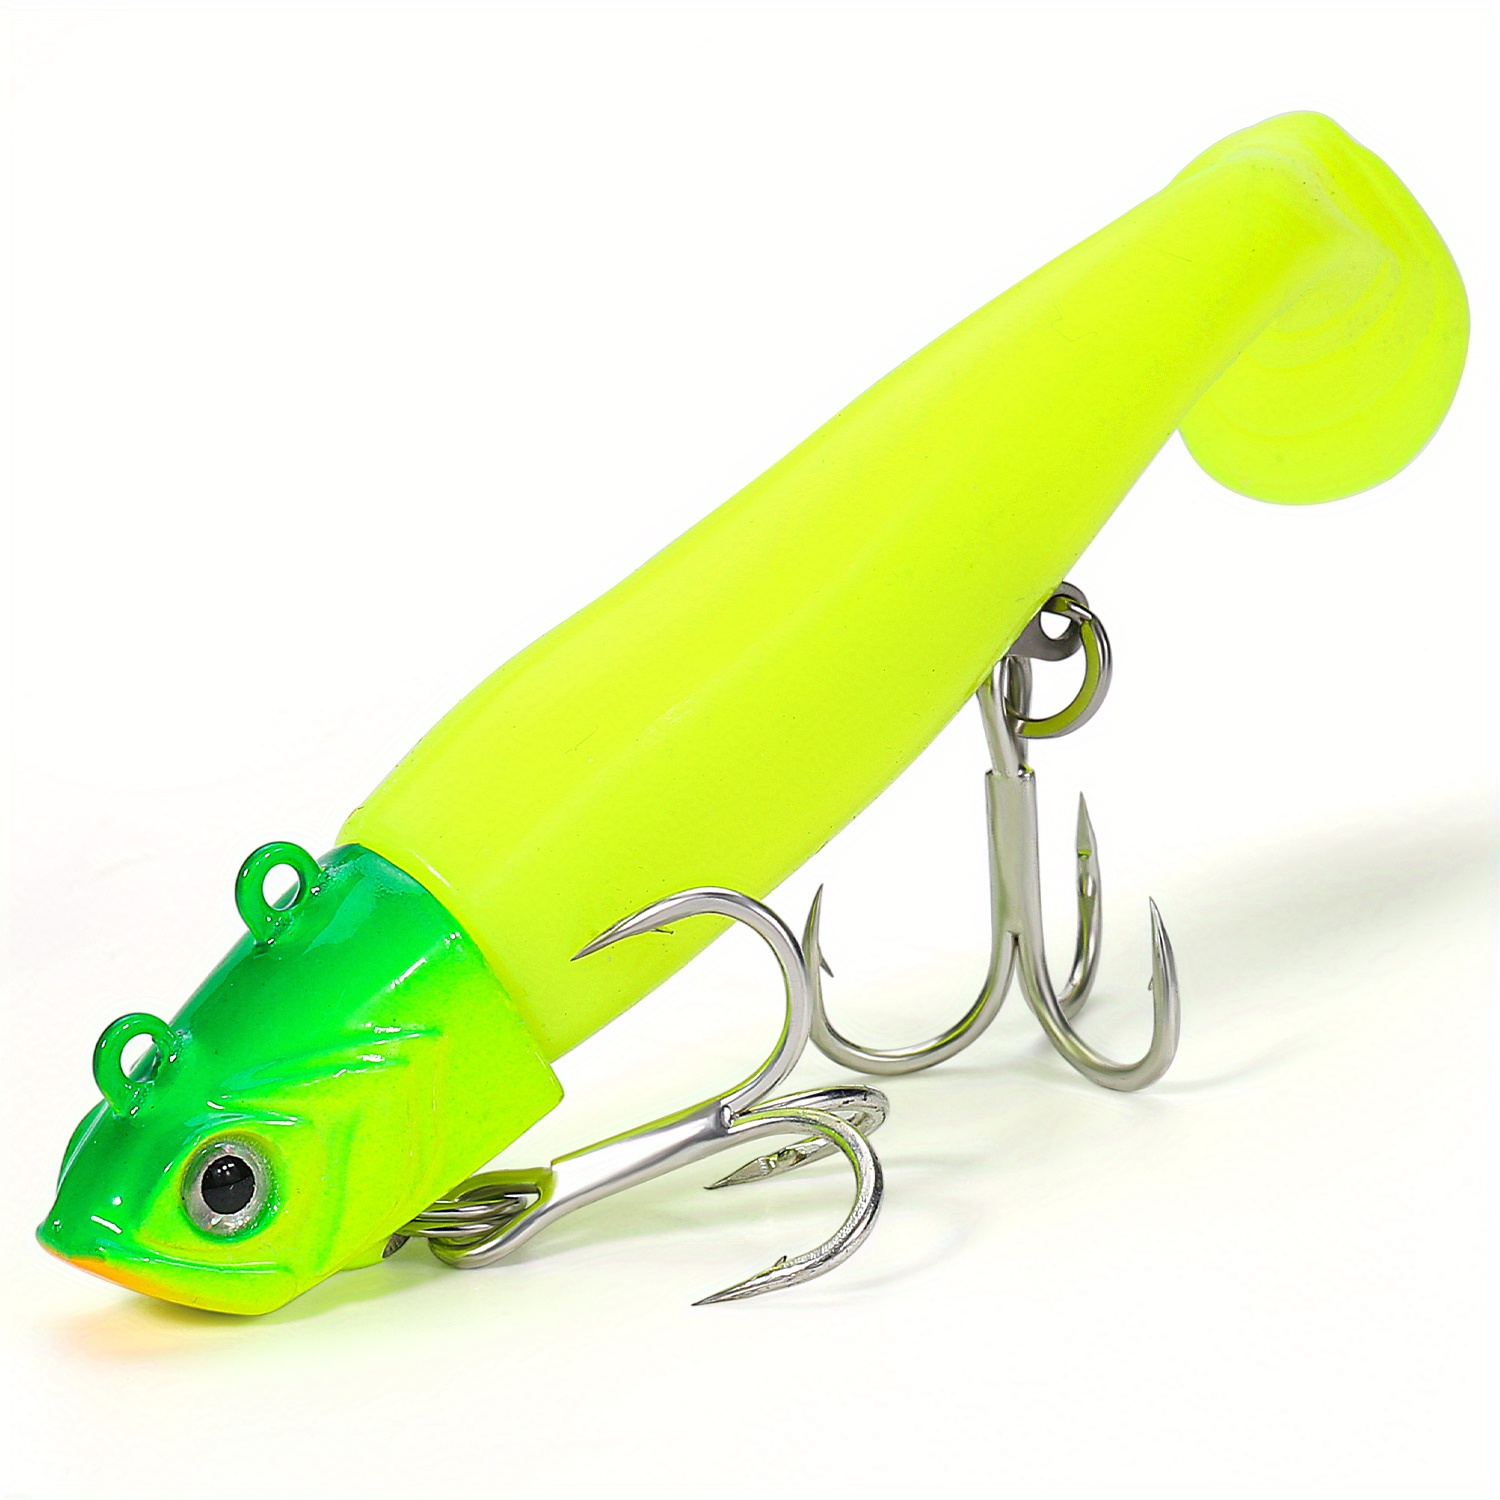 Sougayilang 1pc/1 Box Glow Soft Fishing Lures With Lifelike Eyes,  Biomimetic T-tail Soft Baits With Hard Lead Head, High Frequency Vibration  Wobbler L